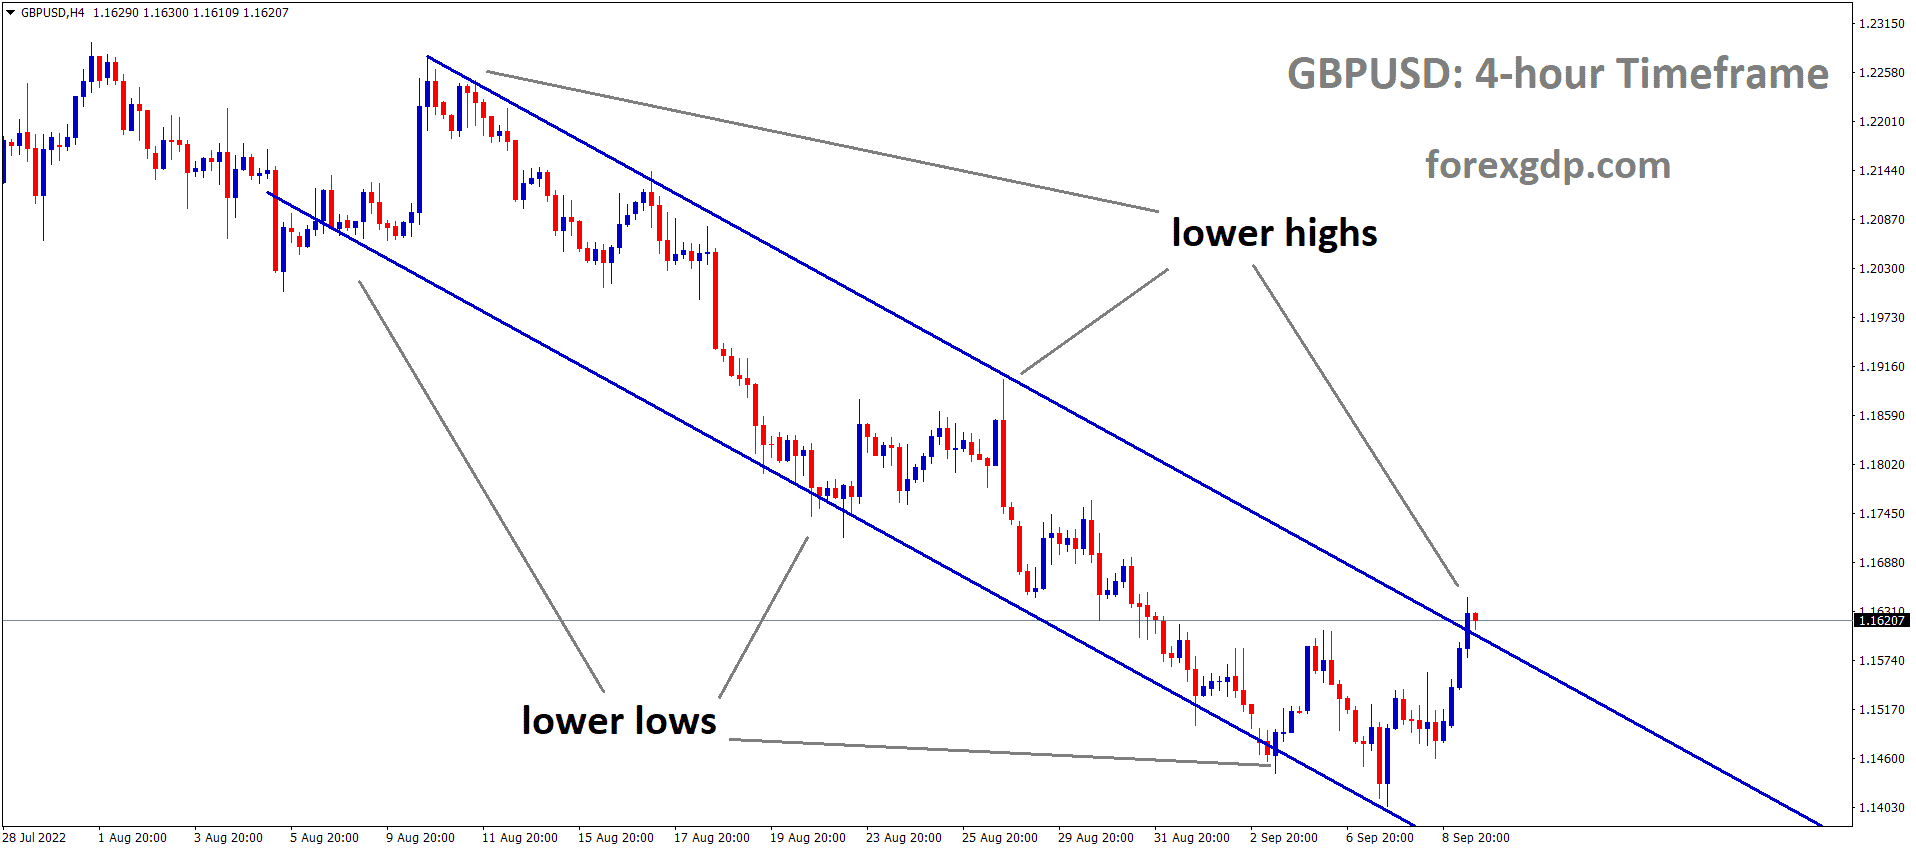 GBPUSD is moving in the Descending channel and the market has reached the lower high area of the channel 1